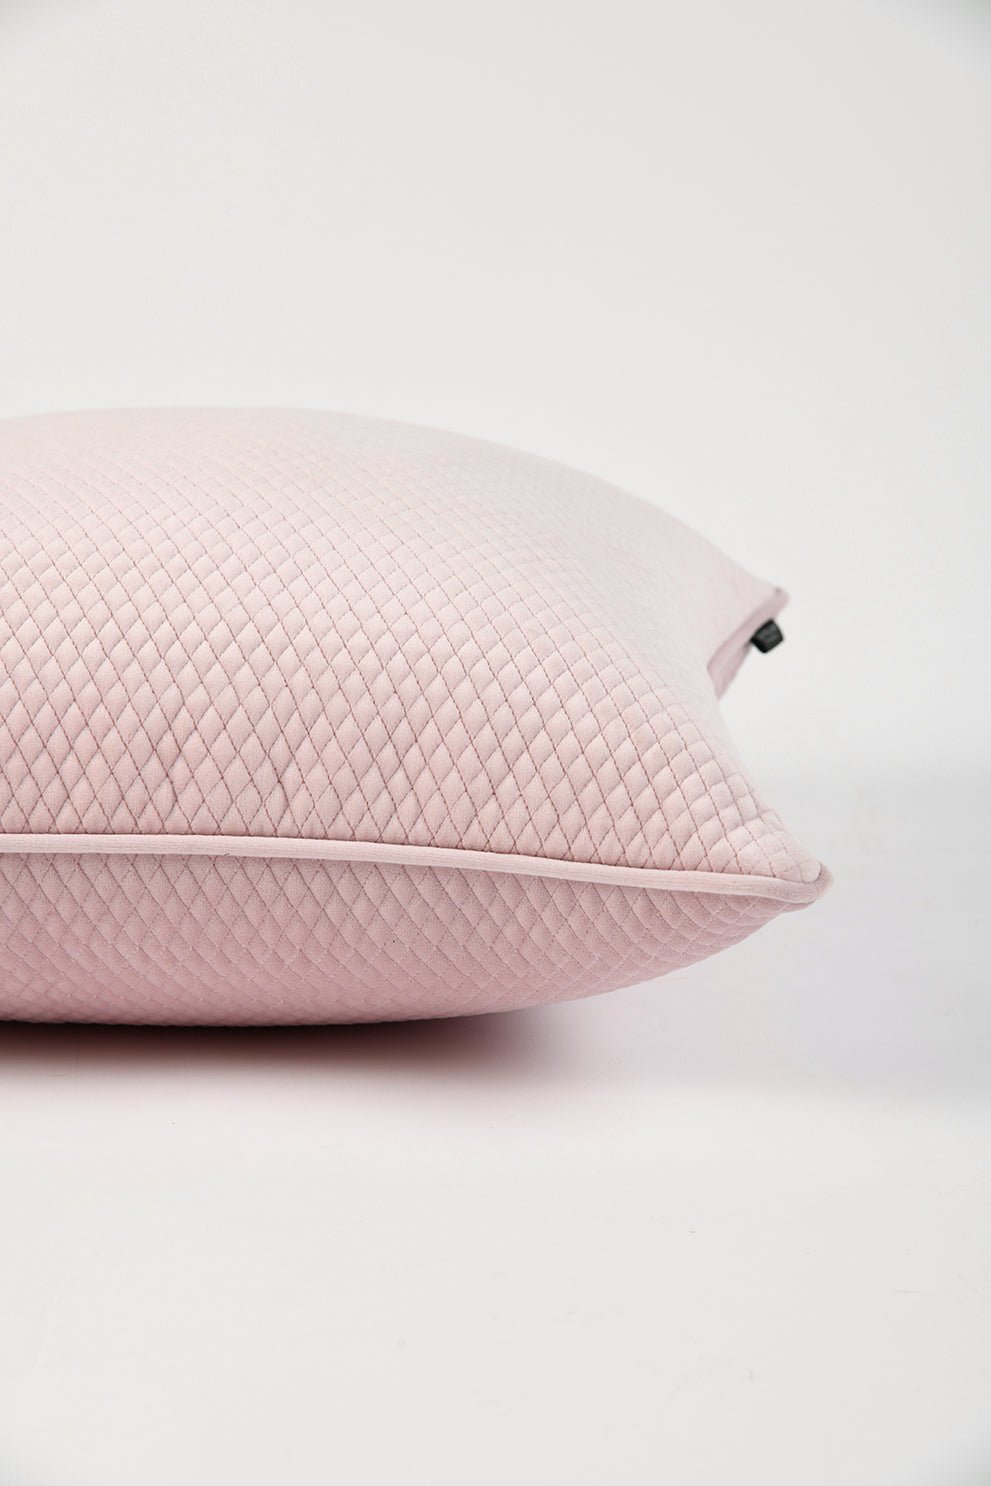 Quilted Pillow Cover , Soft Pink - Pillow Covers